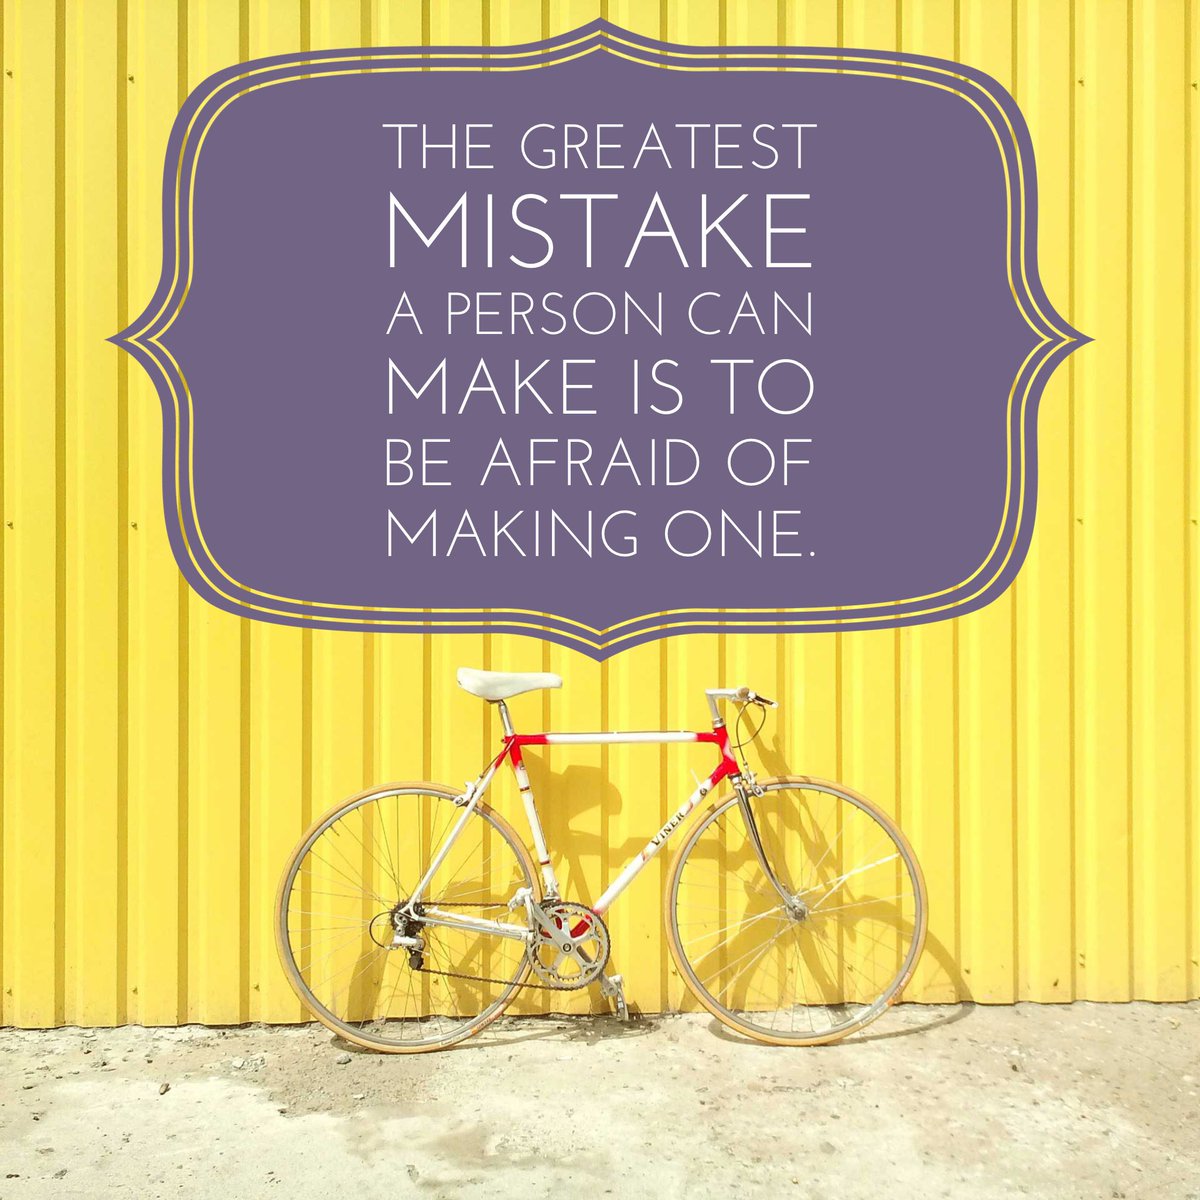 ❓What’s the greatest gift a mistake ever gave you? 🤔 
.
#WednesdayWisdom #wisdom #wisdomquotes #wisequotes #quoteoftheday #qotd #quote #wordsofwisdom #lifequotes #wordstoliveby #lovequotes #wordstoinspire #authorlife #authorinspo #authorinspiration #authormotivation #writerlife